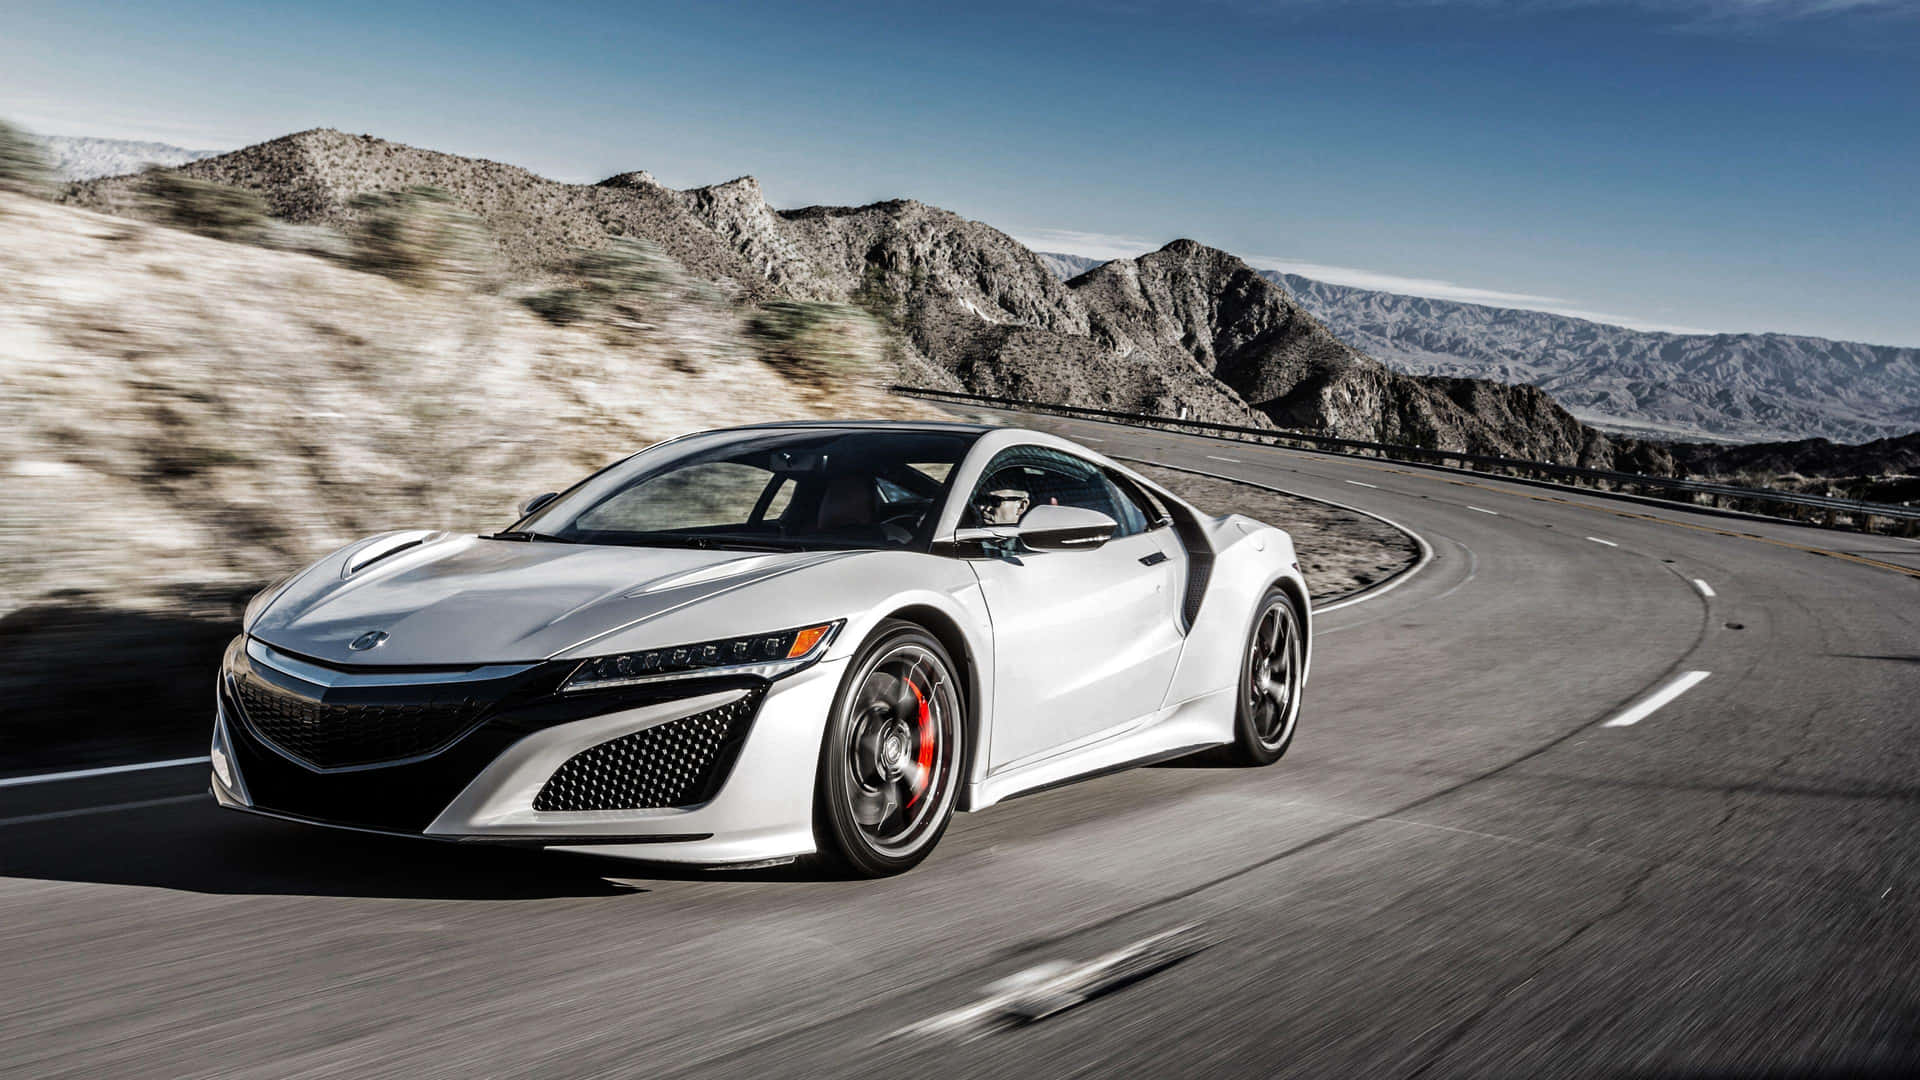 Captivating Acura NSX in Full Glory Wallpaper